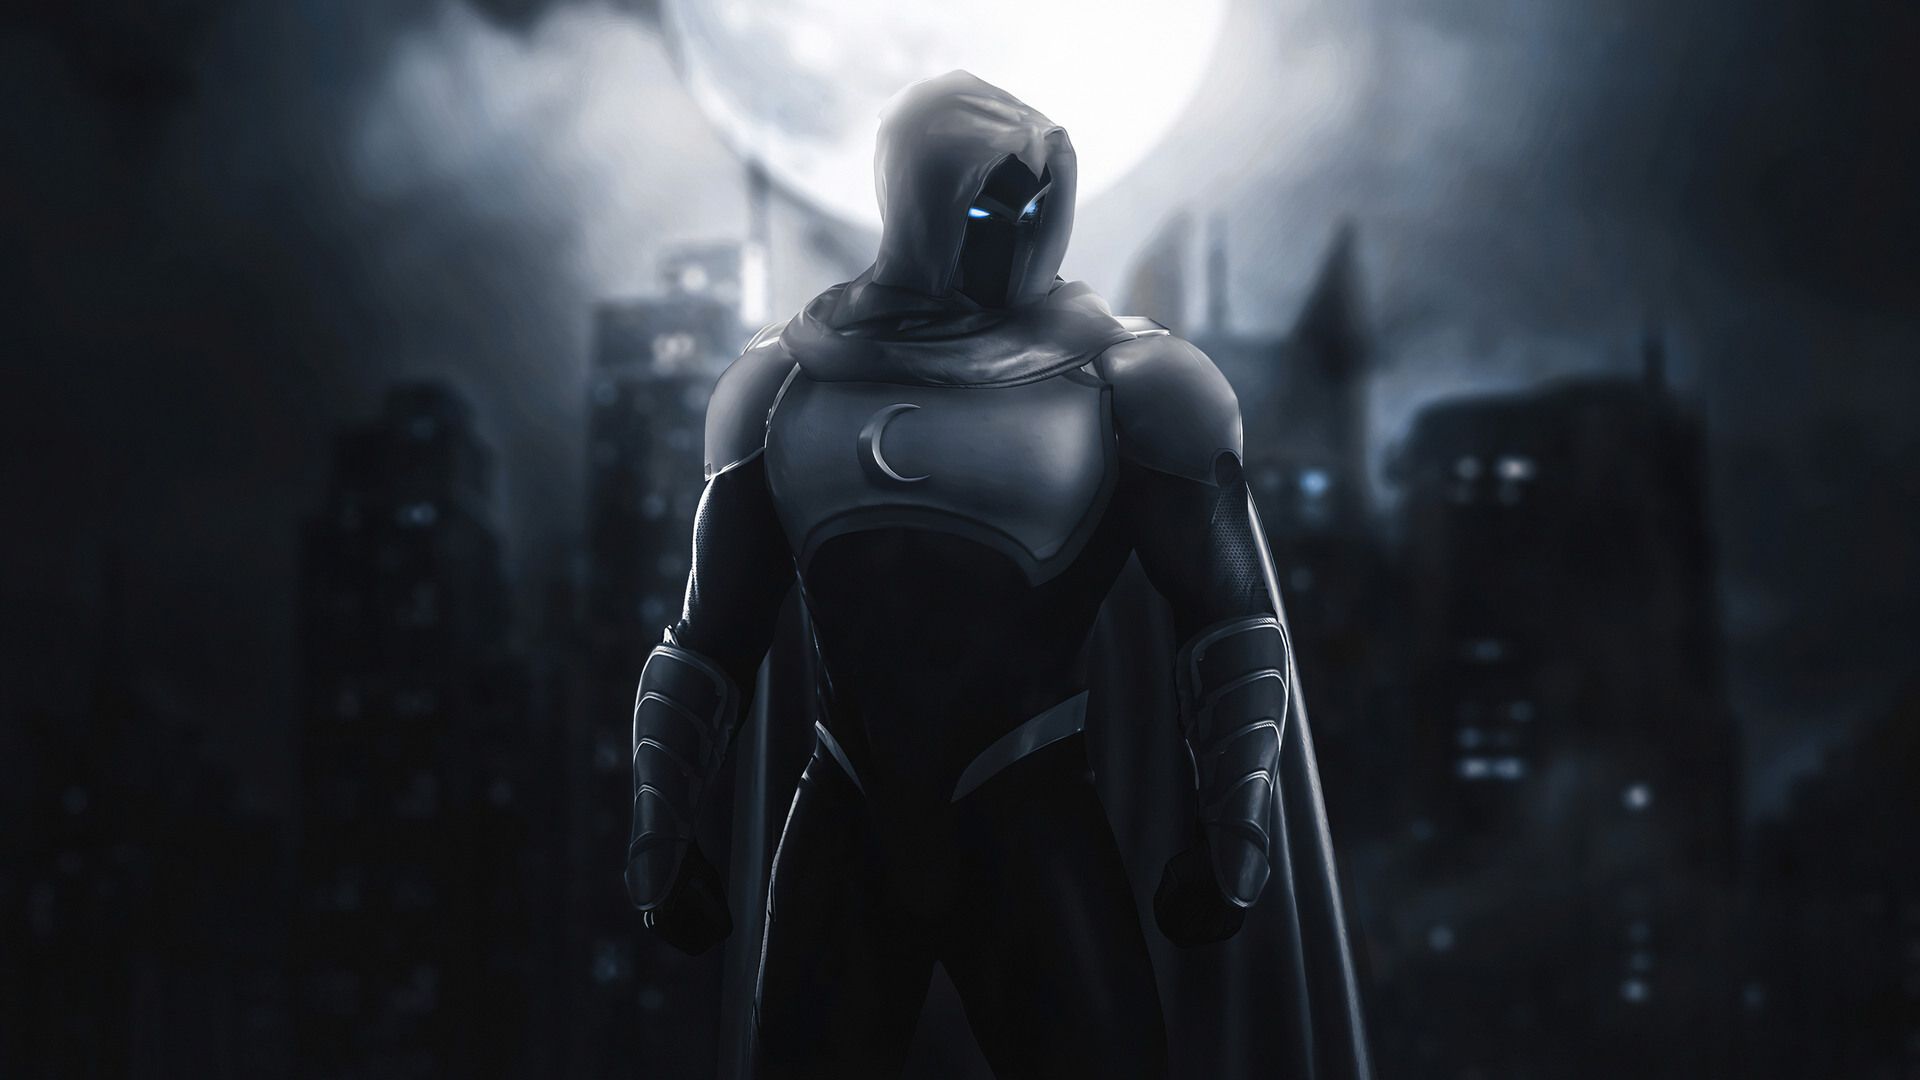 Moon Knight Wallpapers - Top 35 Best Moon Knight Backgrounds Download